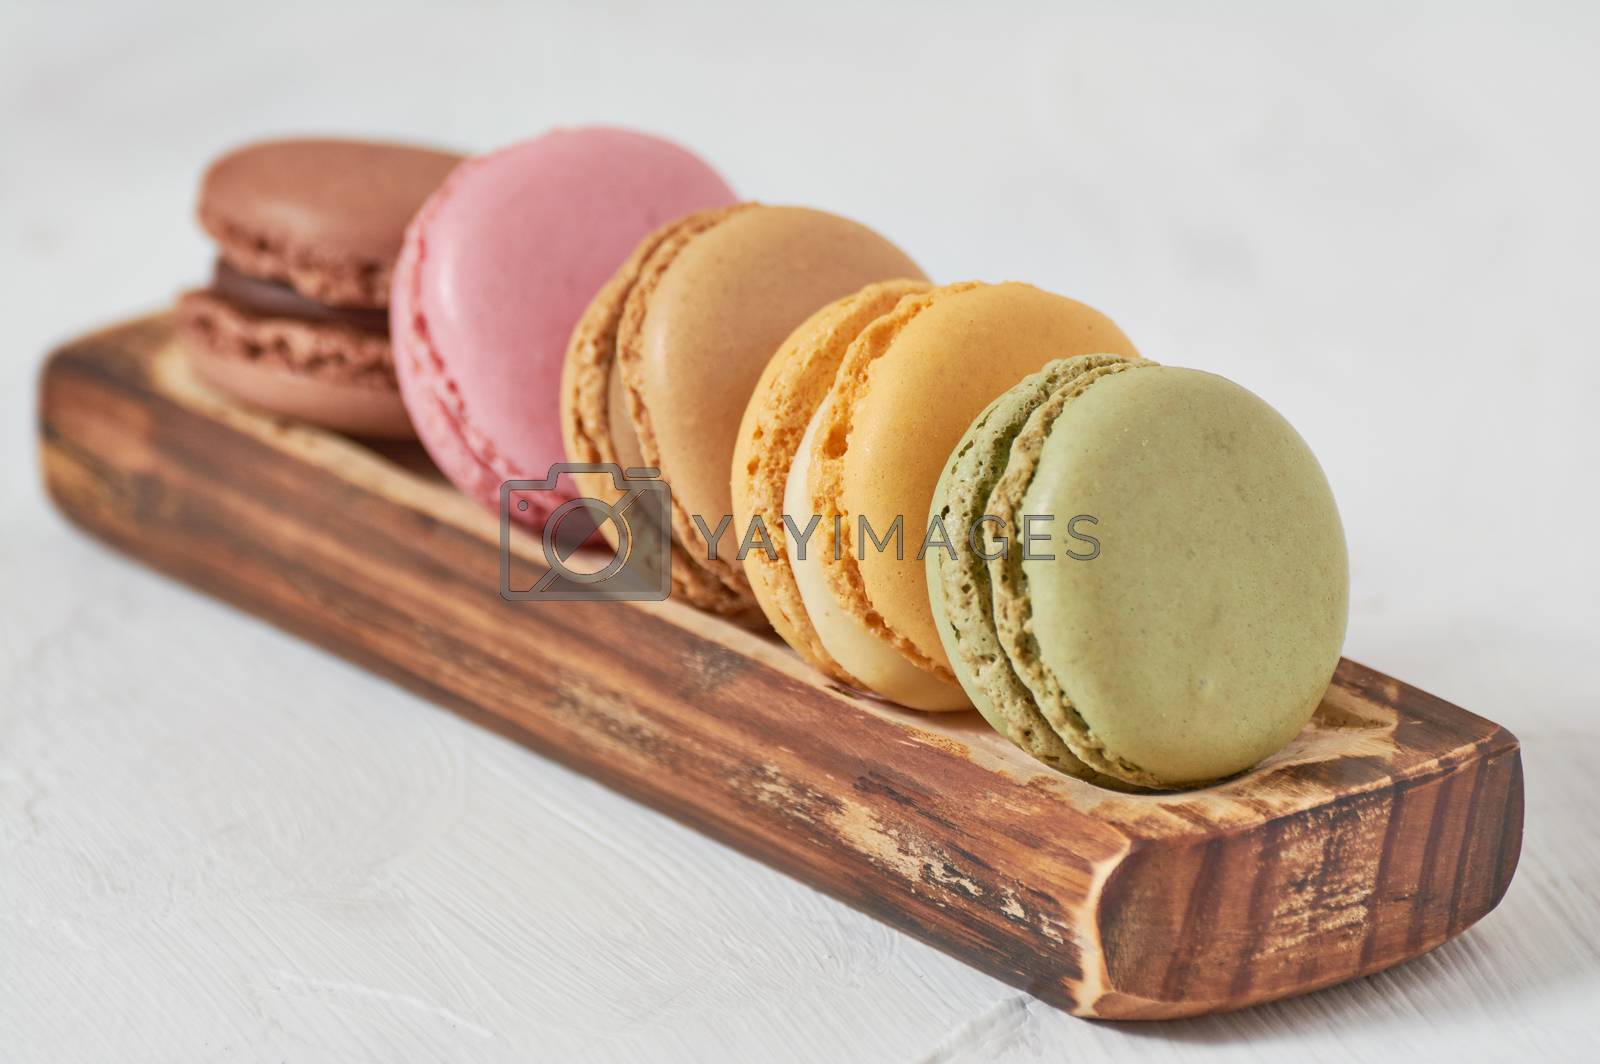 Royalty free image of breakfast of macarons wooden splint by Prf_photo